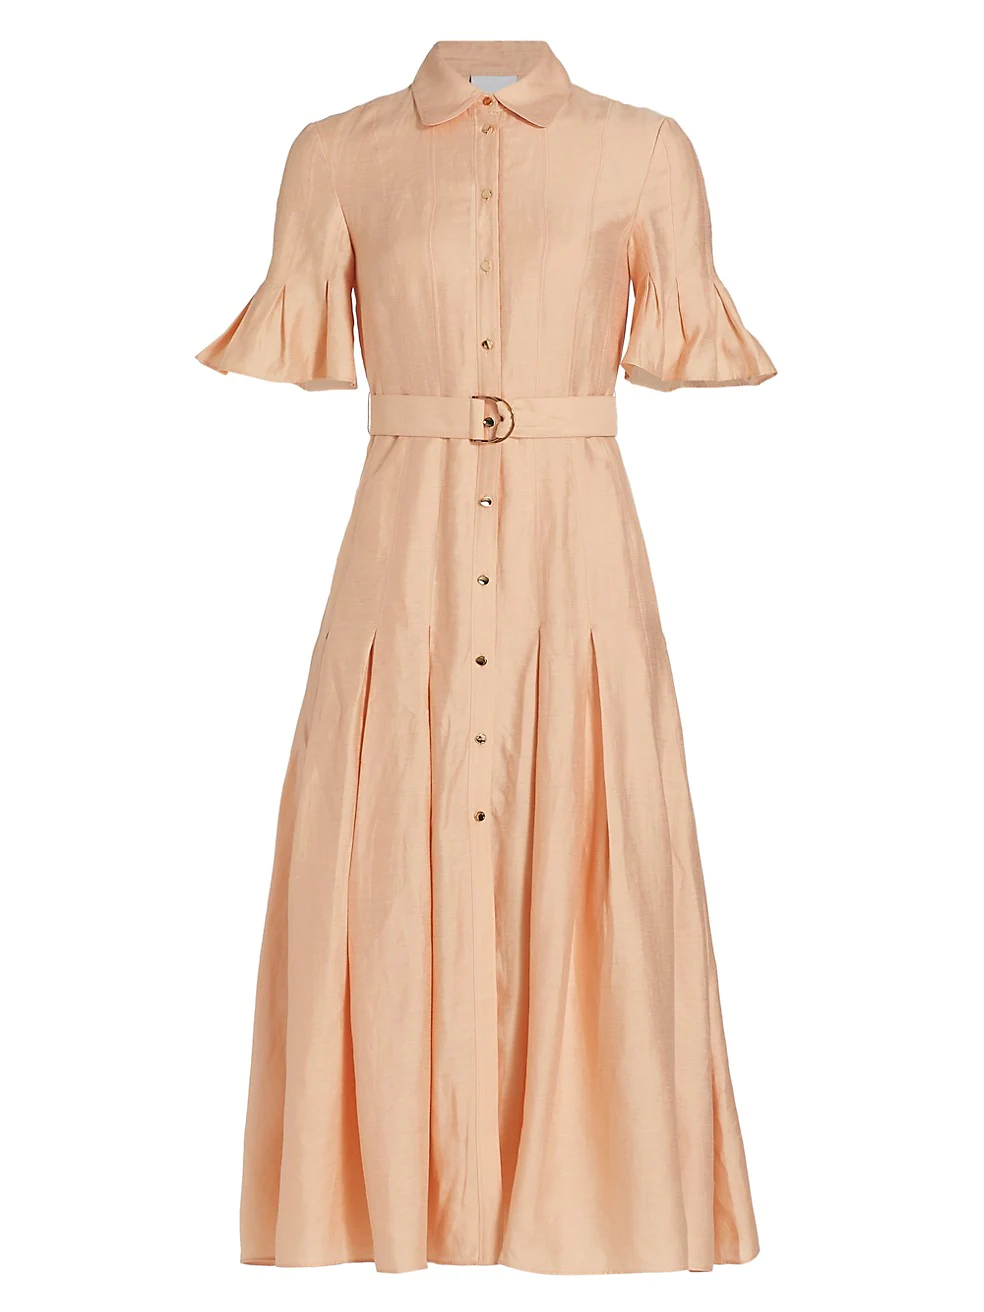 Acler Dress for Spring - Saks fifth Avenue - fashion - style - Spring dresses - dresses